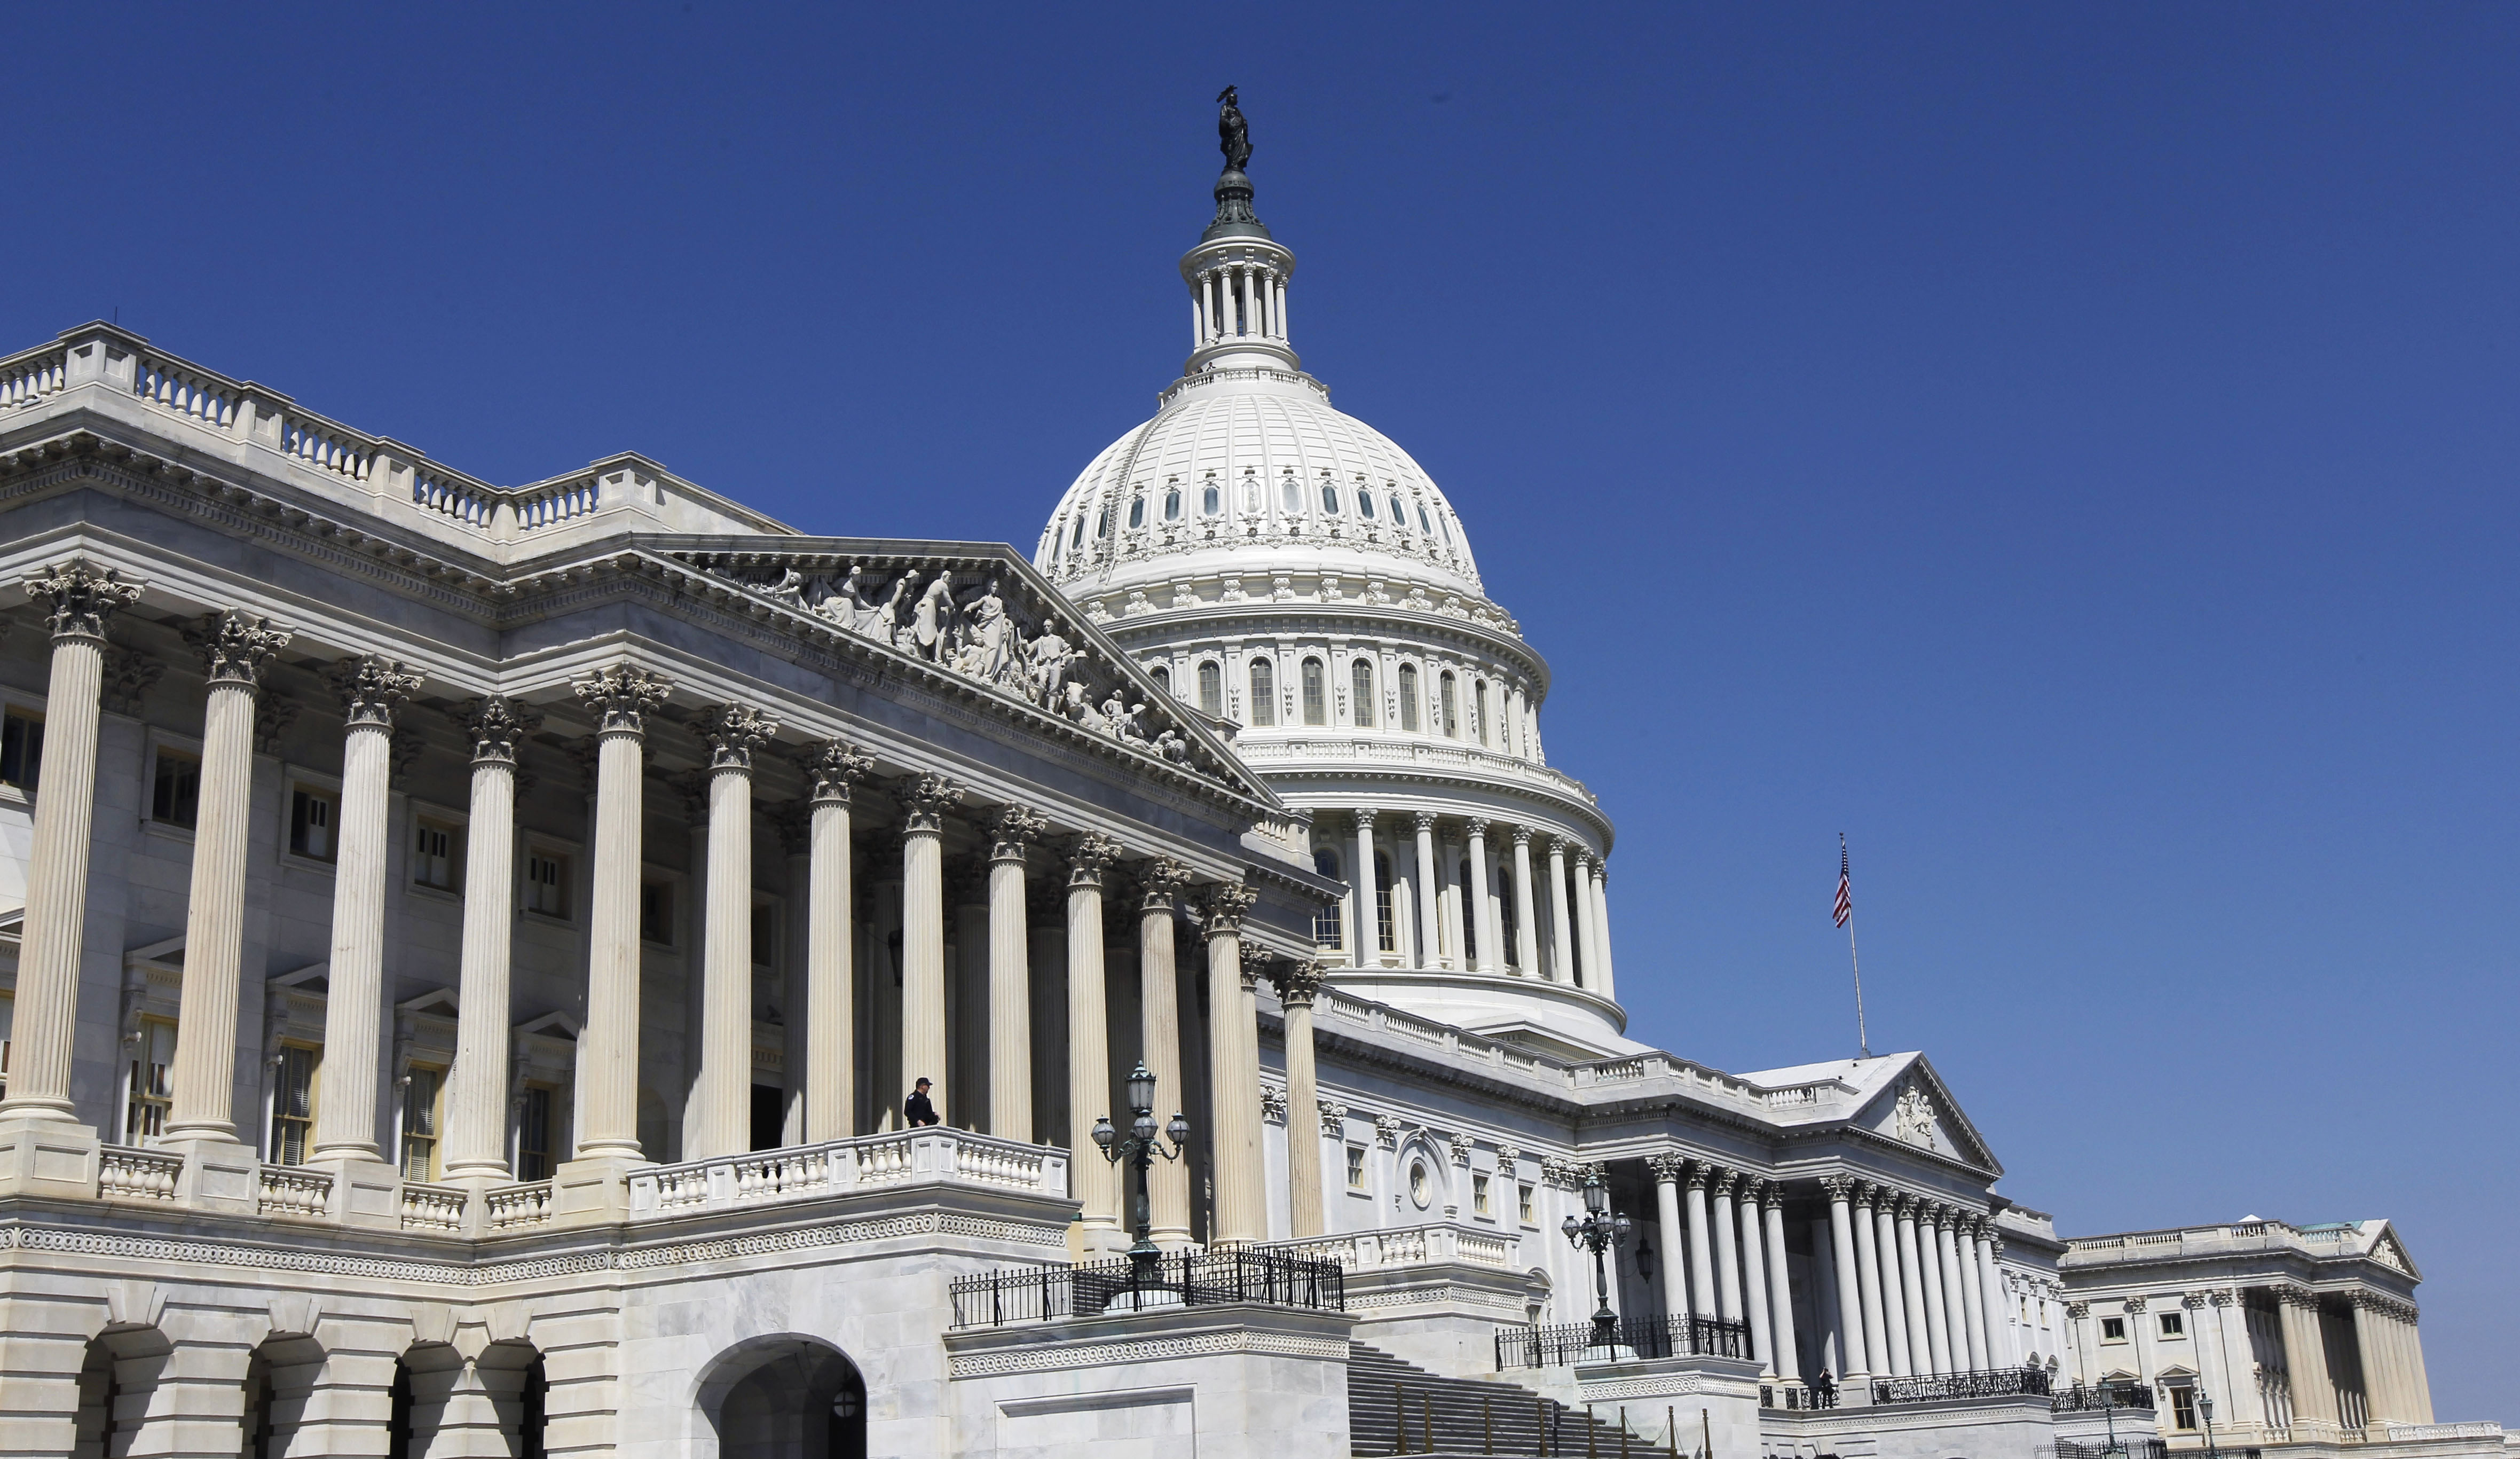 US Congress studies Adventist governance to learn how to move slower